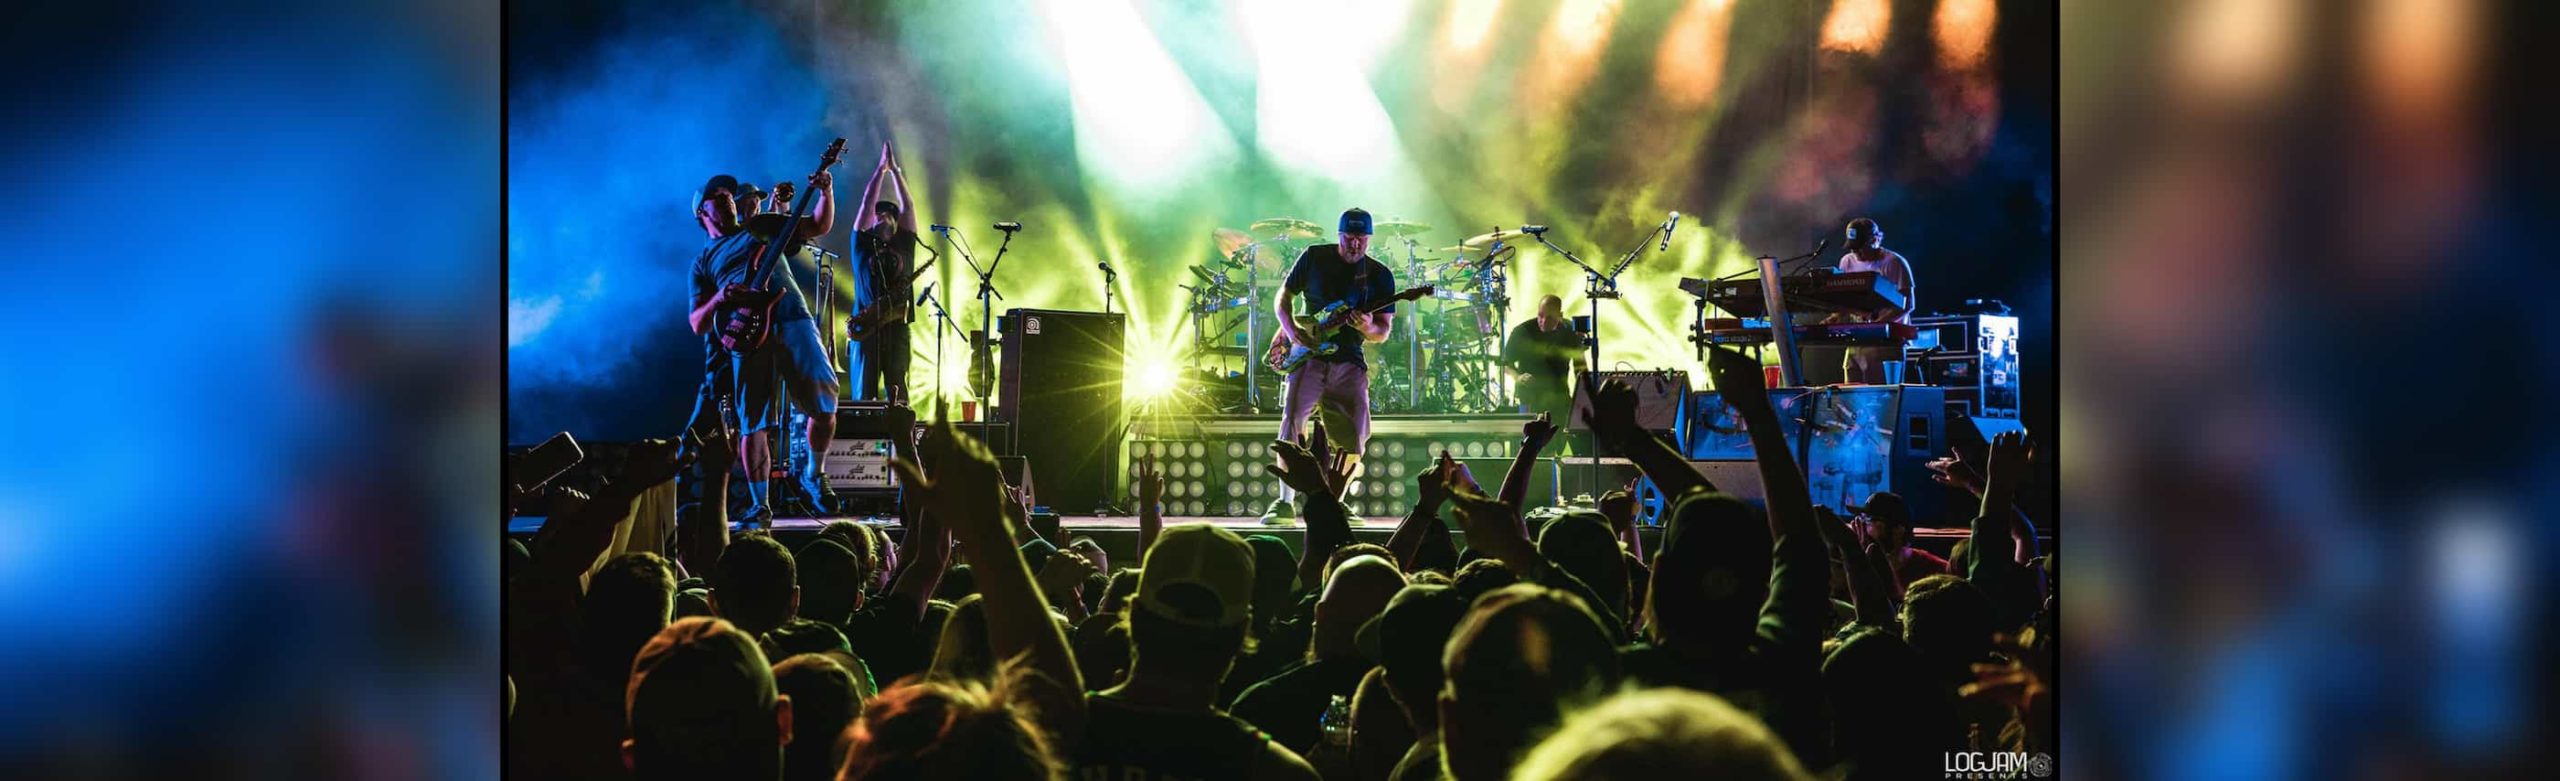 Slightly Stoopid, Matisyahu, Tribal Seeds, and Hirie Announce Montana Concert Image